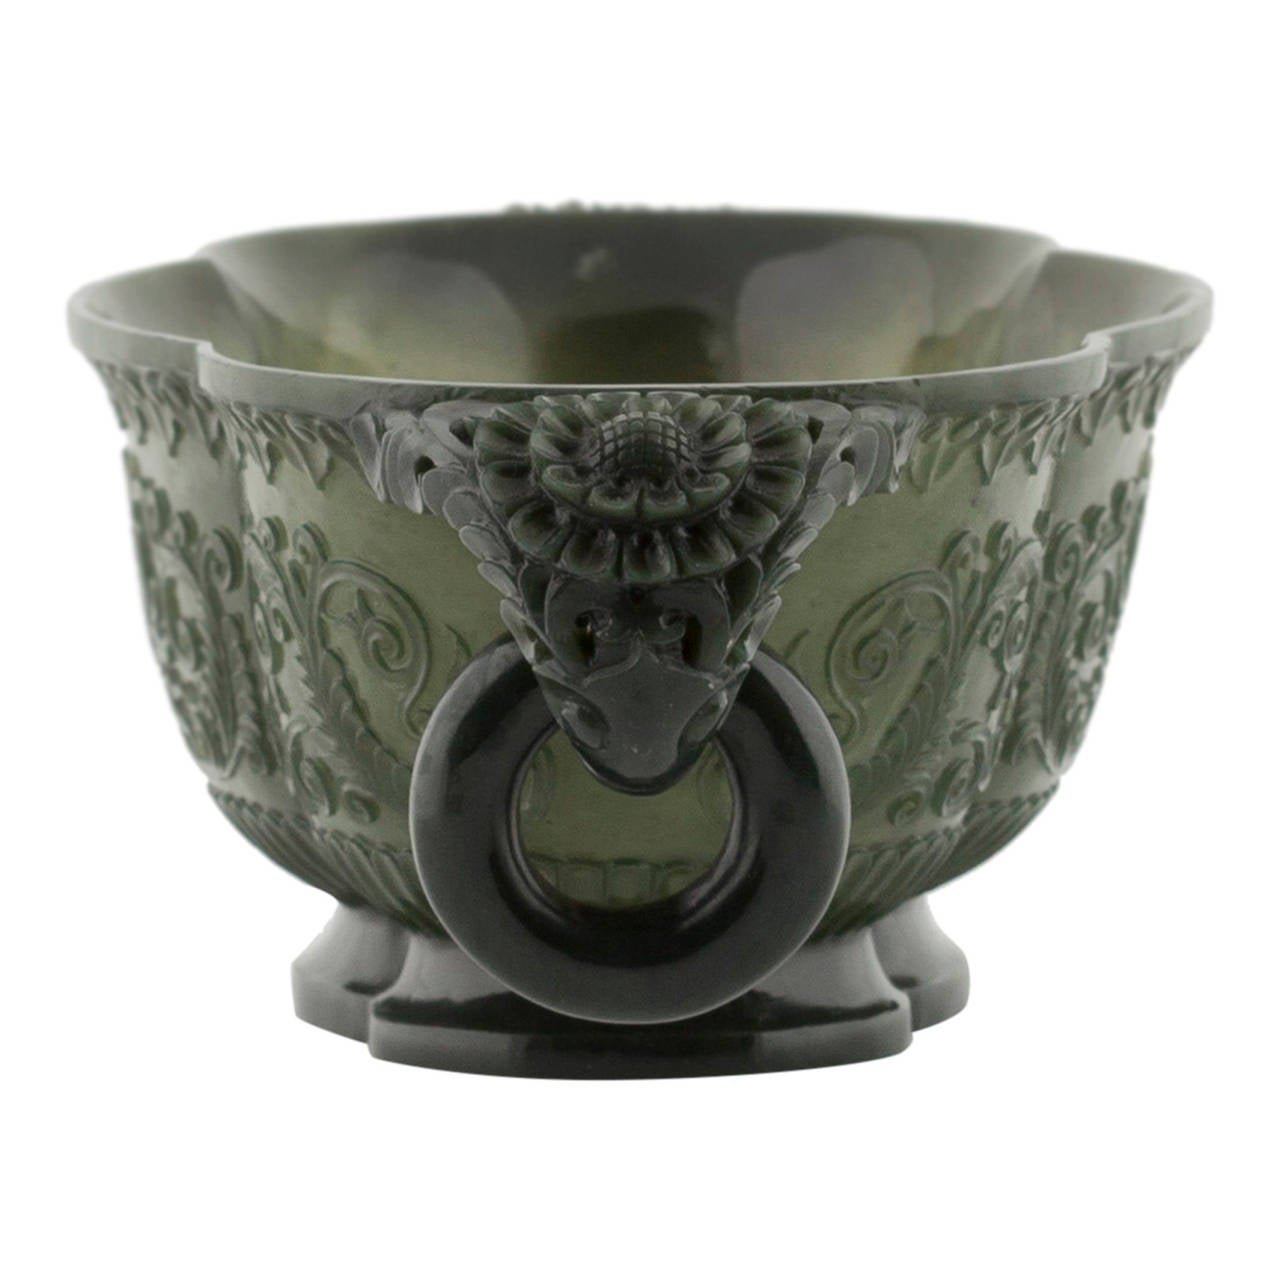 Elaborately hand-carved table centre piece in spinach jade, featuring curved handles retaining circular jade rings, scalloped neck and matching base. Three curved mottled jade panels feature botanical carvings and complimentary carved borders. When